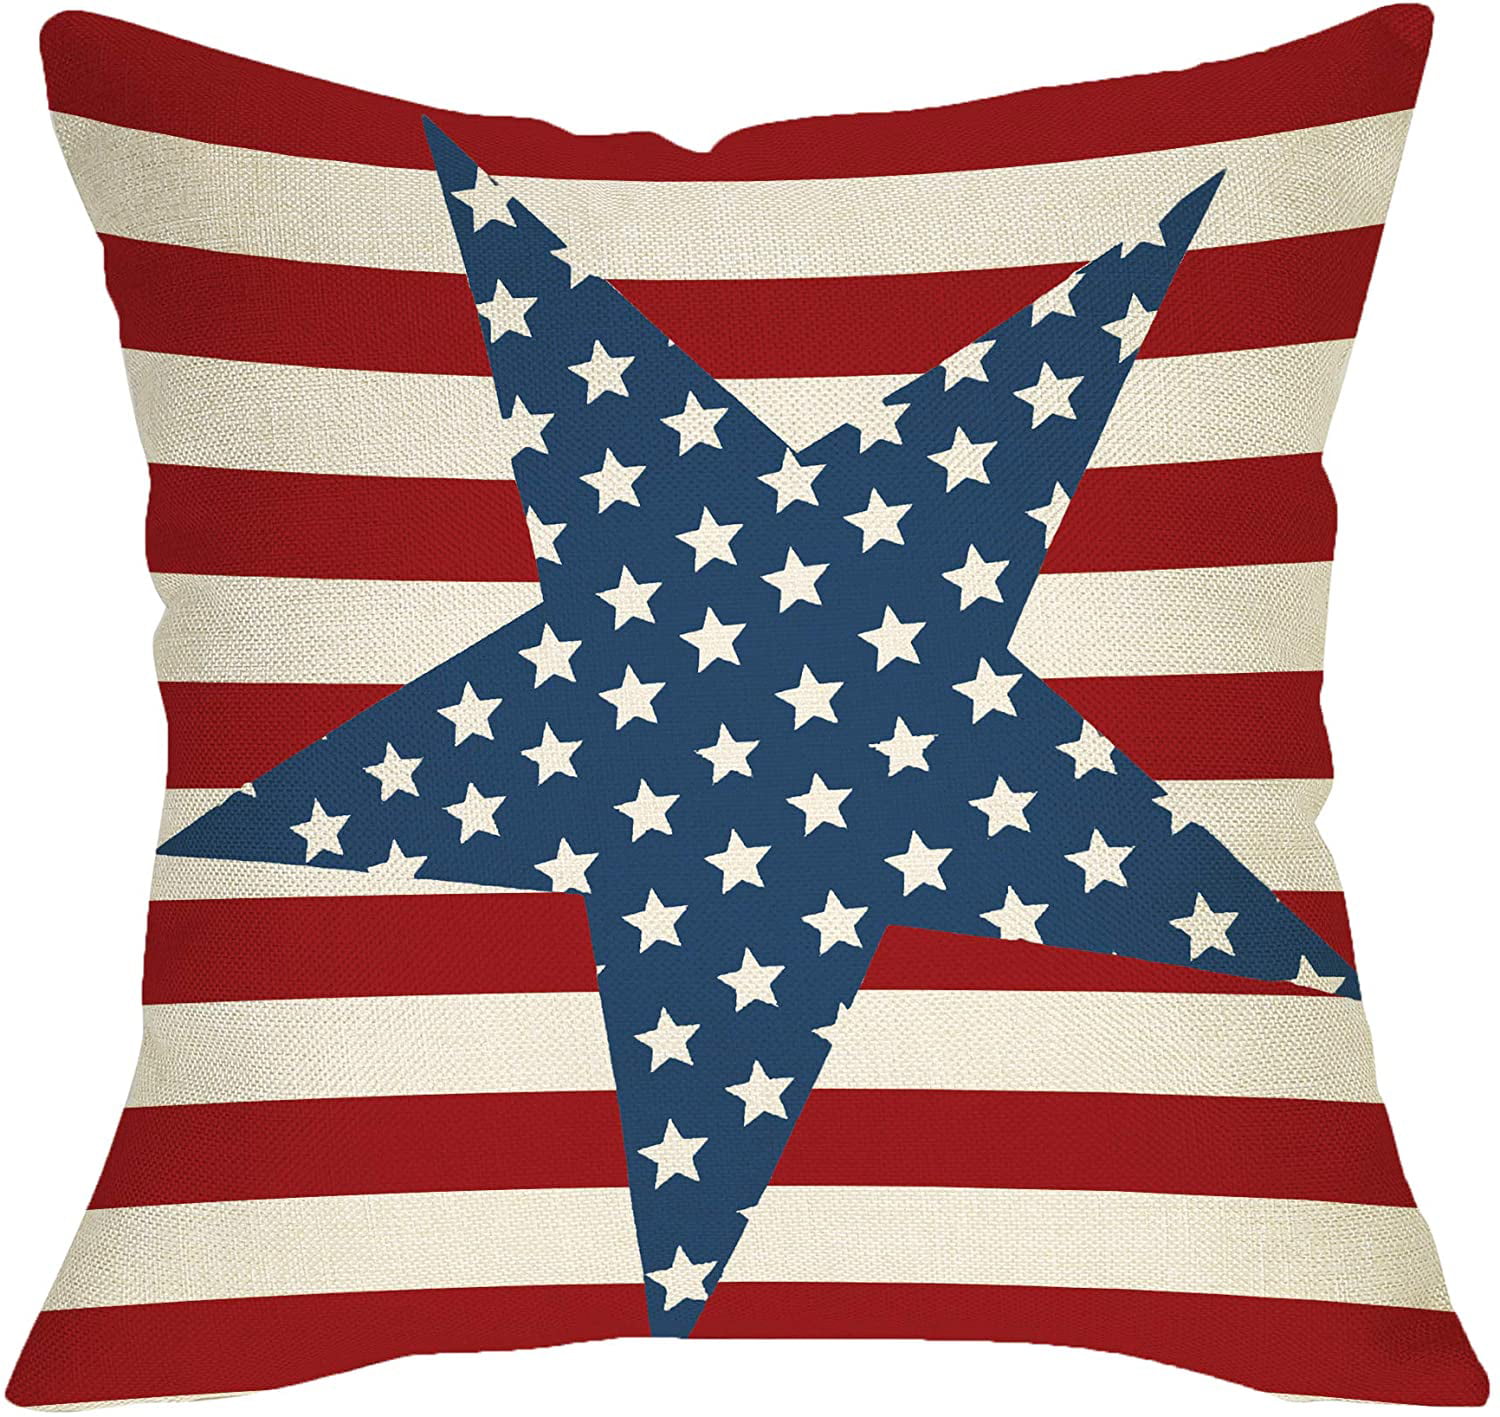 Flag Series Throw Pillow Covers Cases for Couch Sofa Home Decor 18 x 18 inches 